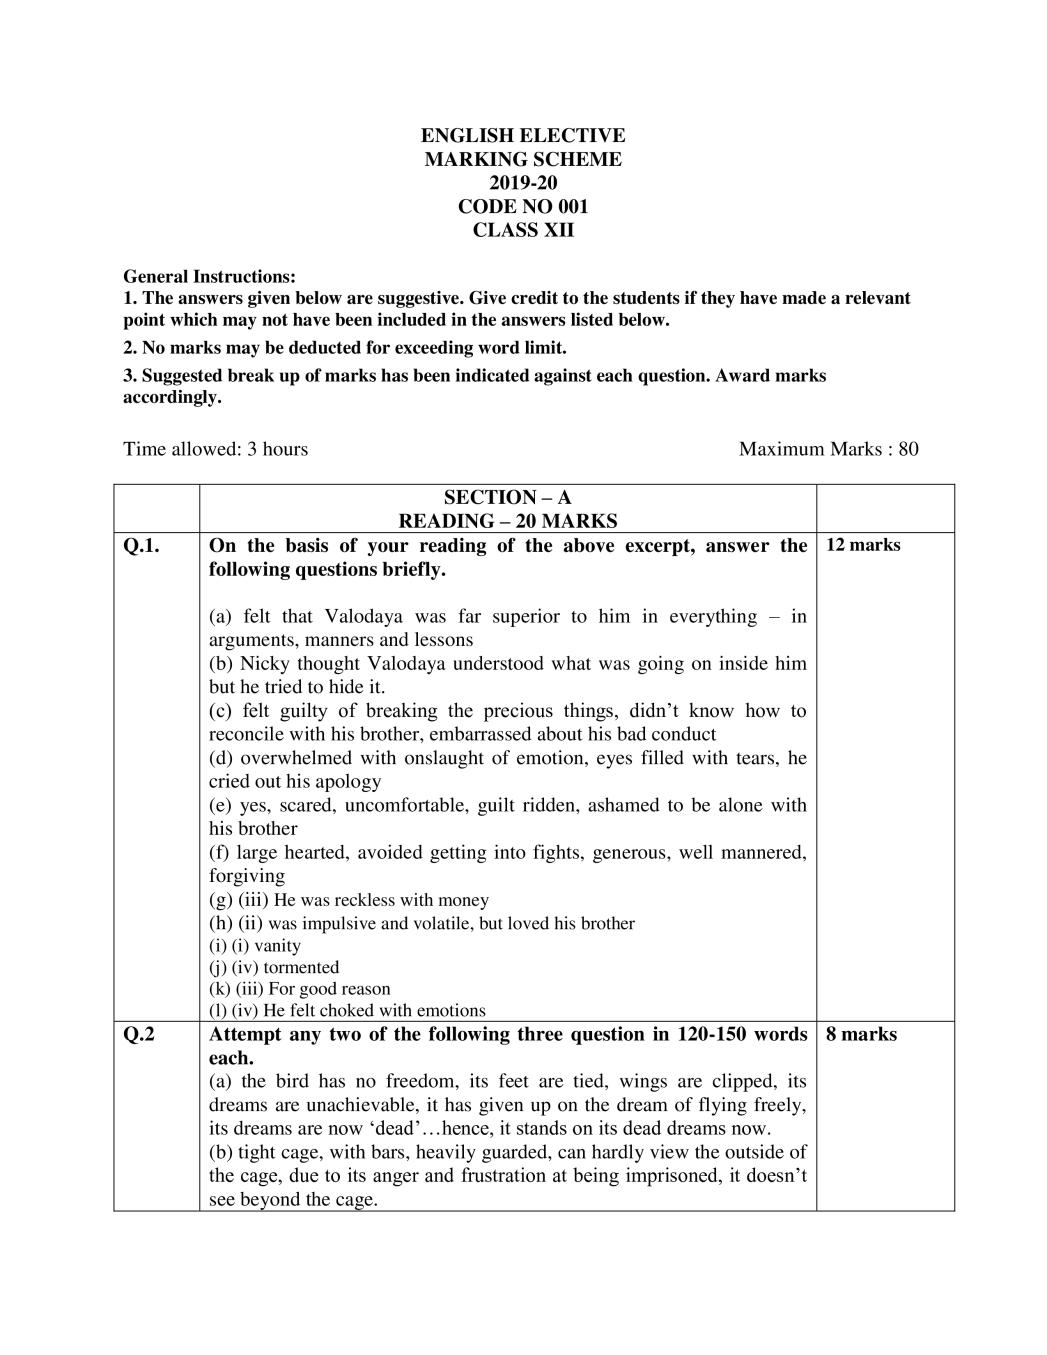 CBSE Class 12 Marking Scheme 2020 for English Elective - Page 1